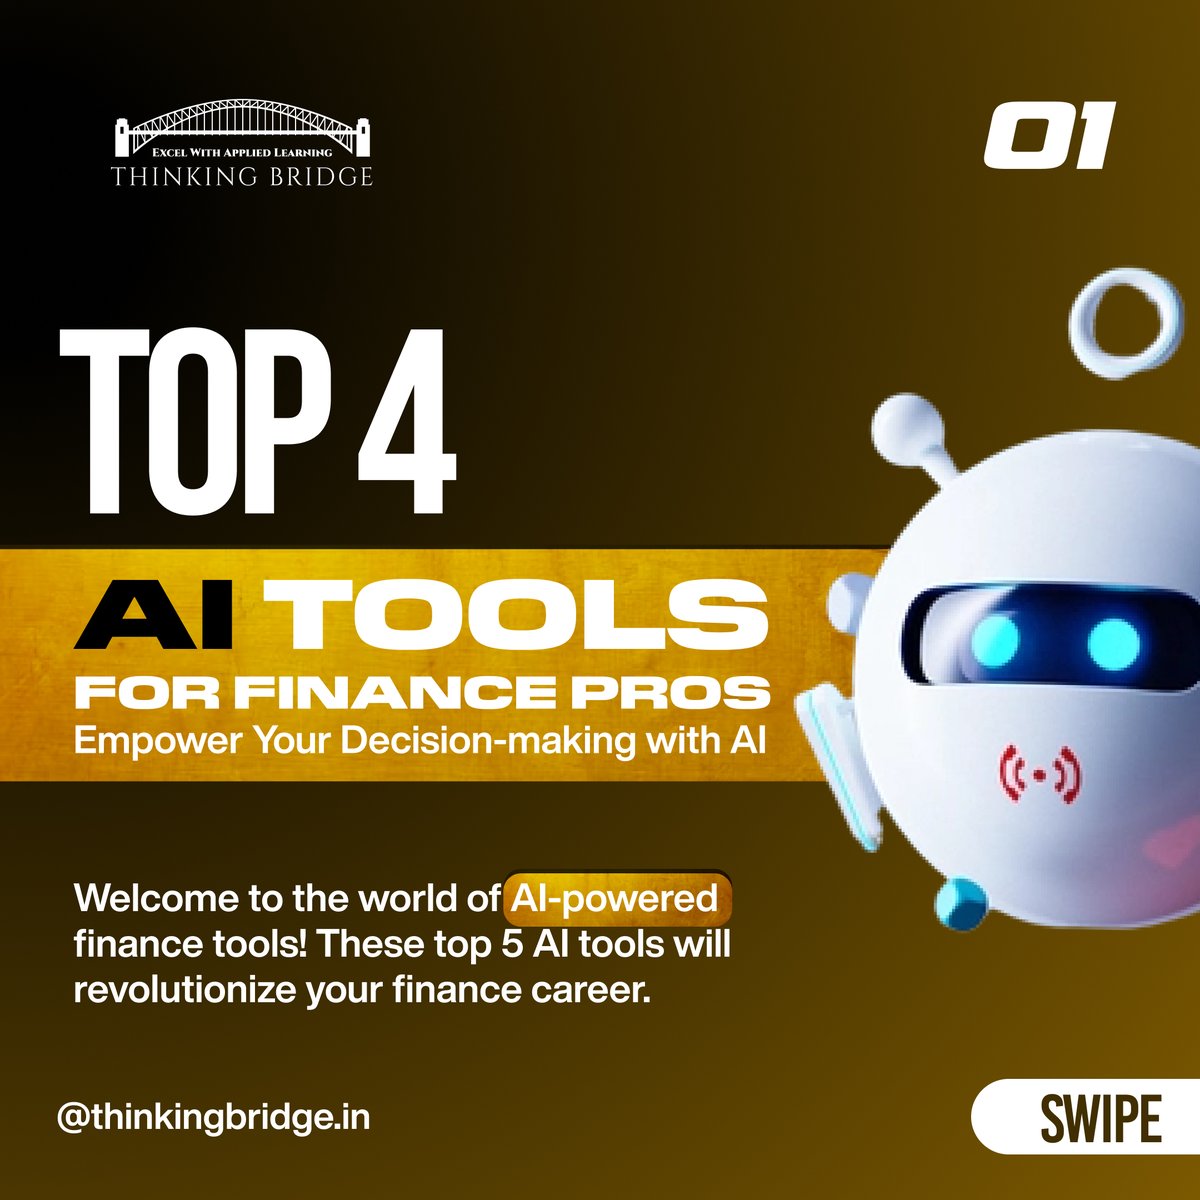 Embrace the power of AI in finance with these top 5 game-changers! 💪💰

#thinkingbridge #chatgpt #chatgpt4 #ai #artificialintelligence #artificialintelligenceai #technology #finance #financialtips #financialeducation #investment #strategy #frauddetection #big4 #accounting